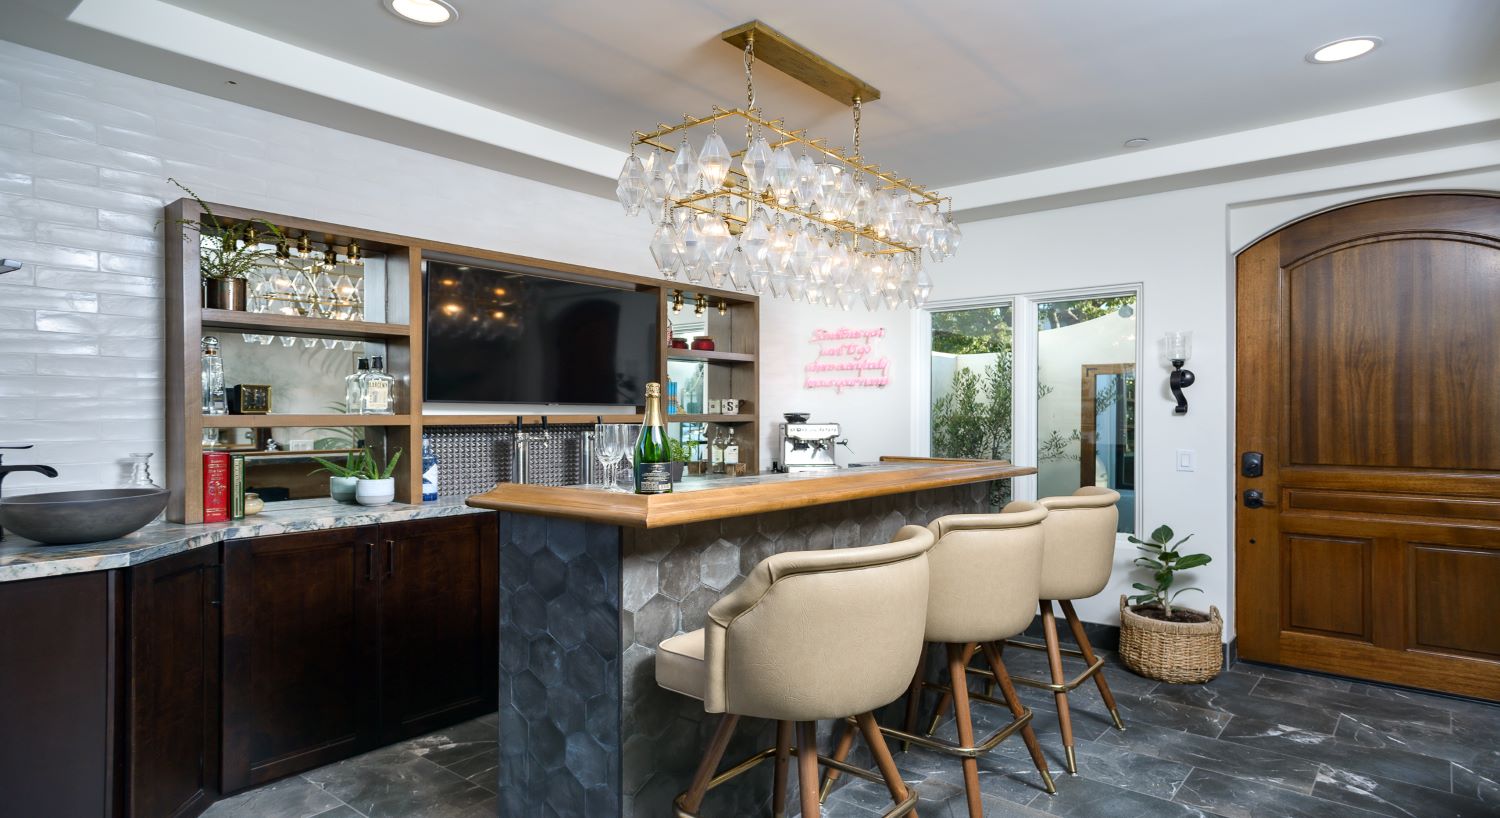 Bar area with glass chandelier, cream leather stools, and front entry door to outside